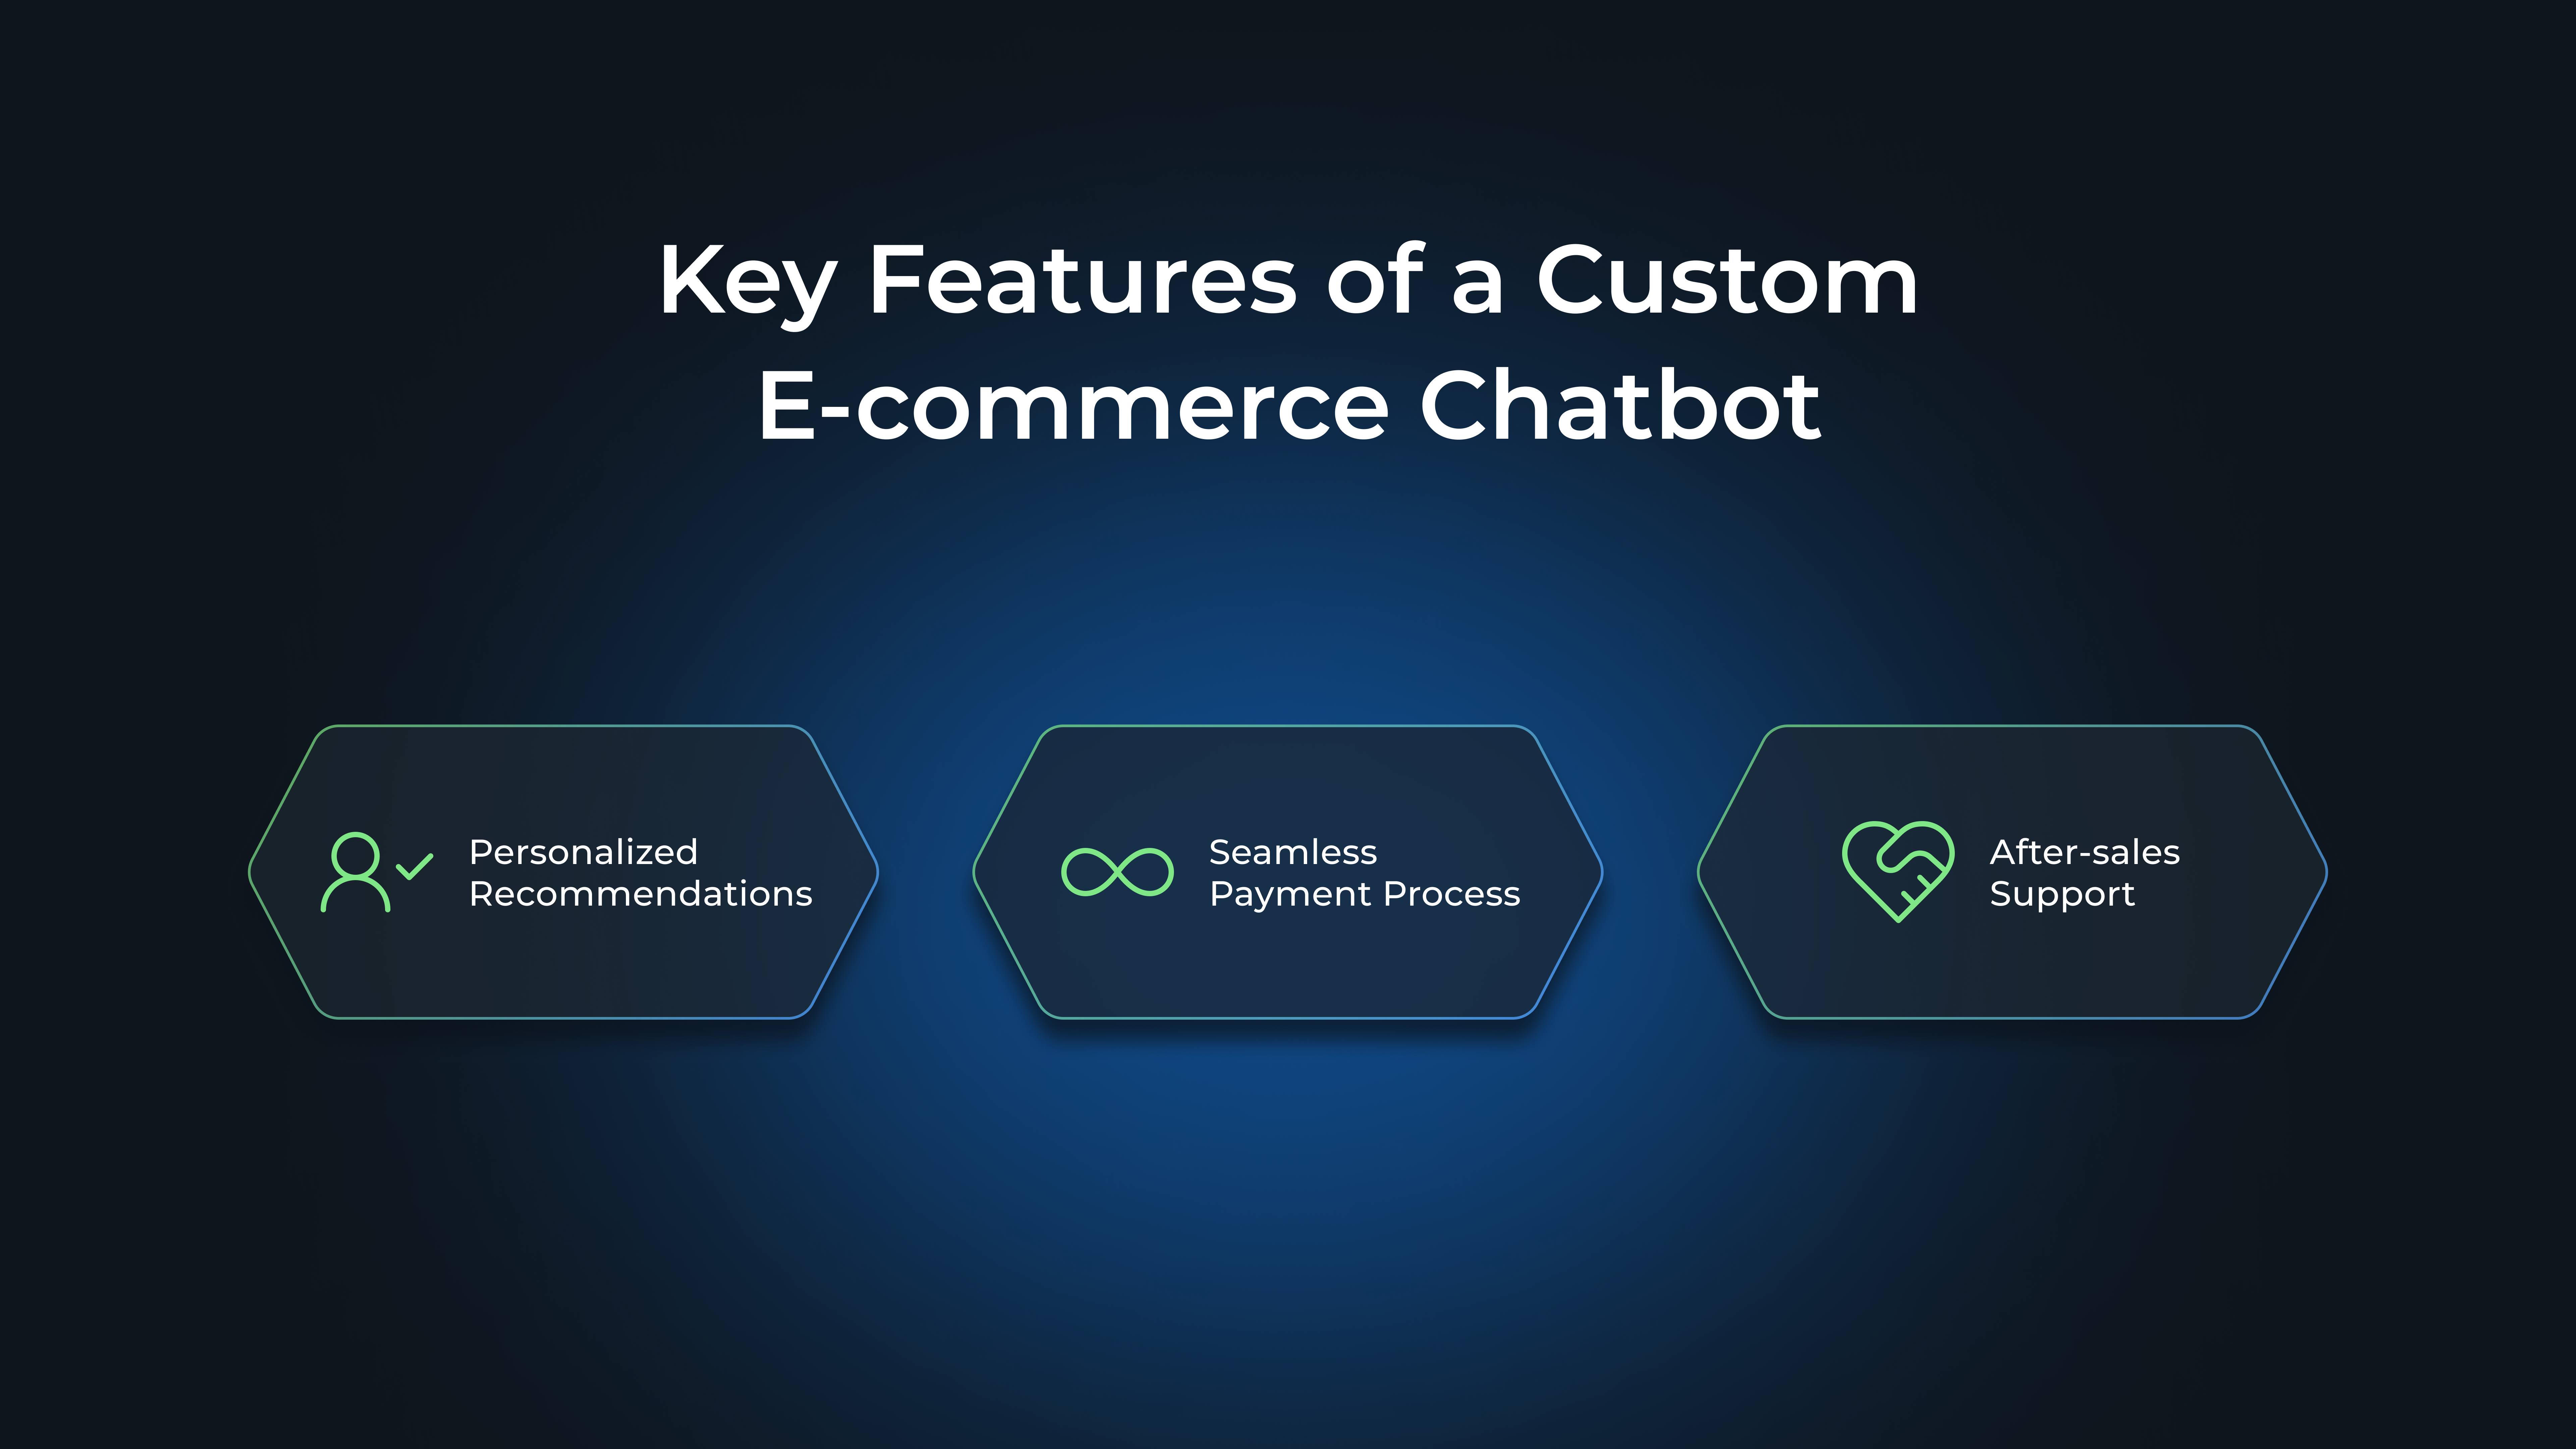 Key Features of a Custom E-commerce Chatbot: Personalized Recommendations, Seamless Payment Process, After-sales Support
